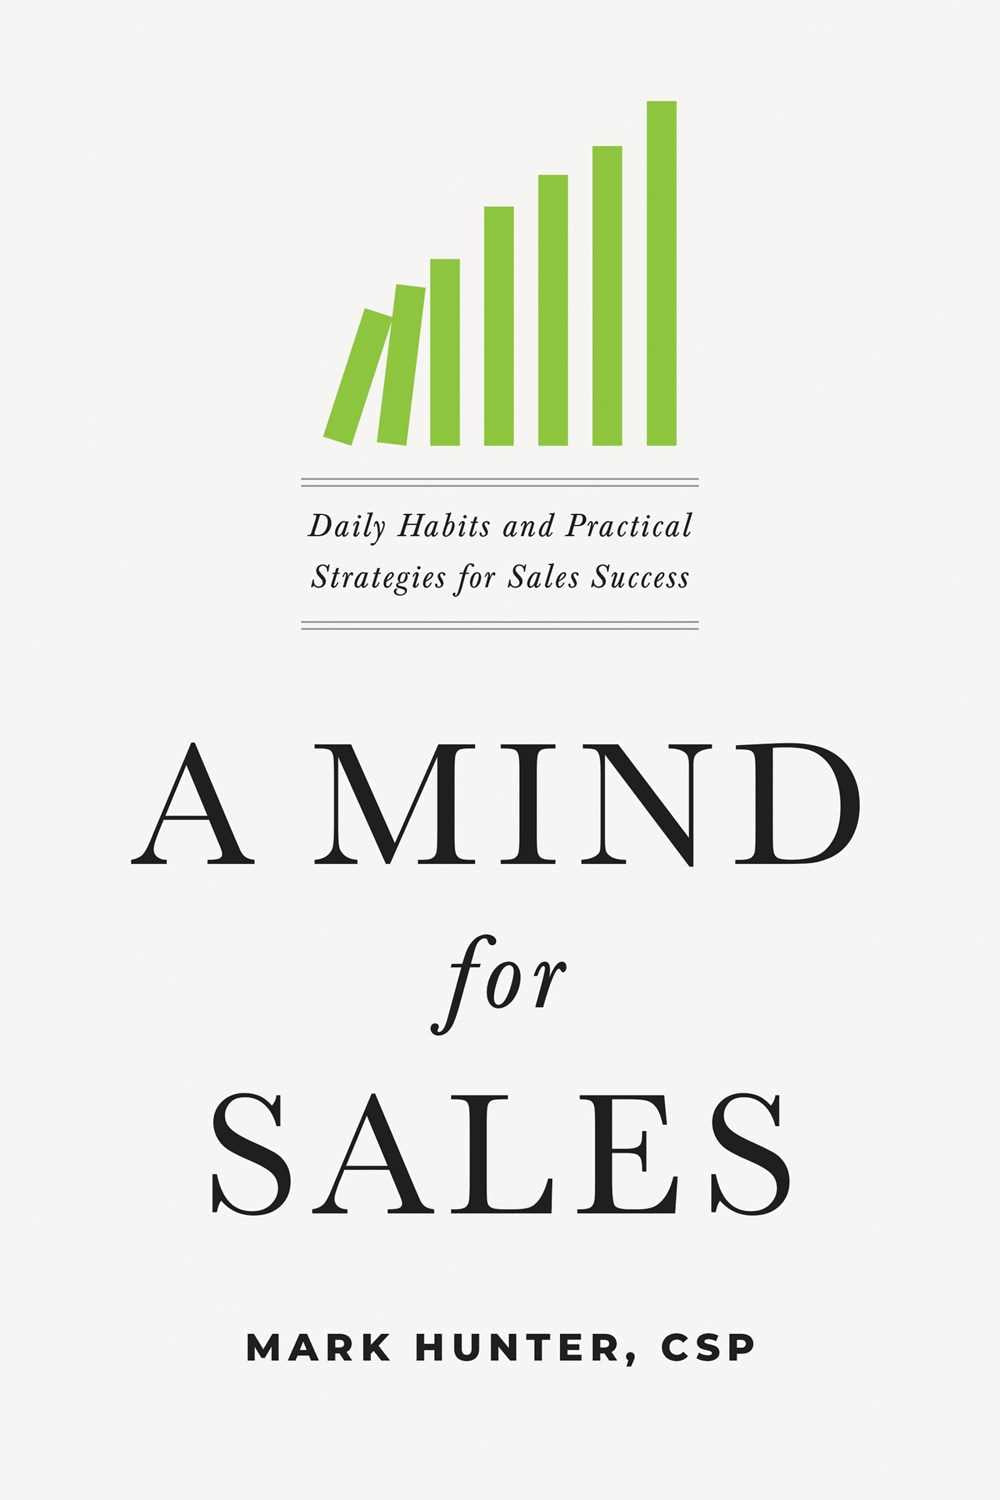 A Mind for Sales : Daily Habits and Practical Strategies for Sales - Mark Hunter - 9781400215850 - HarperCollins